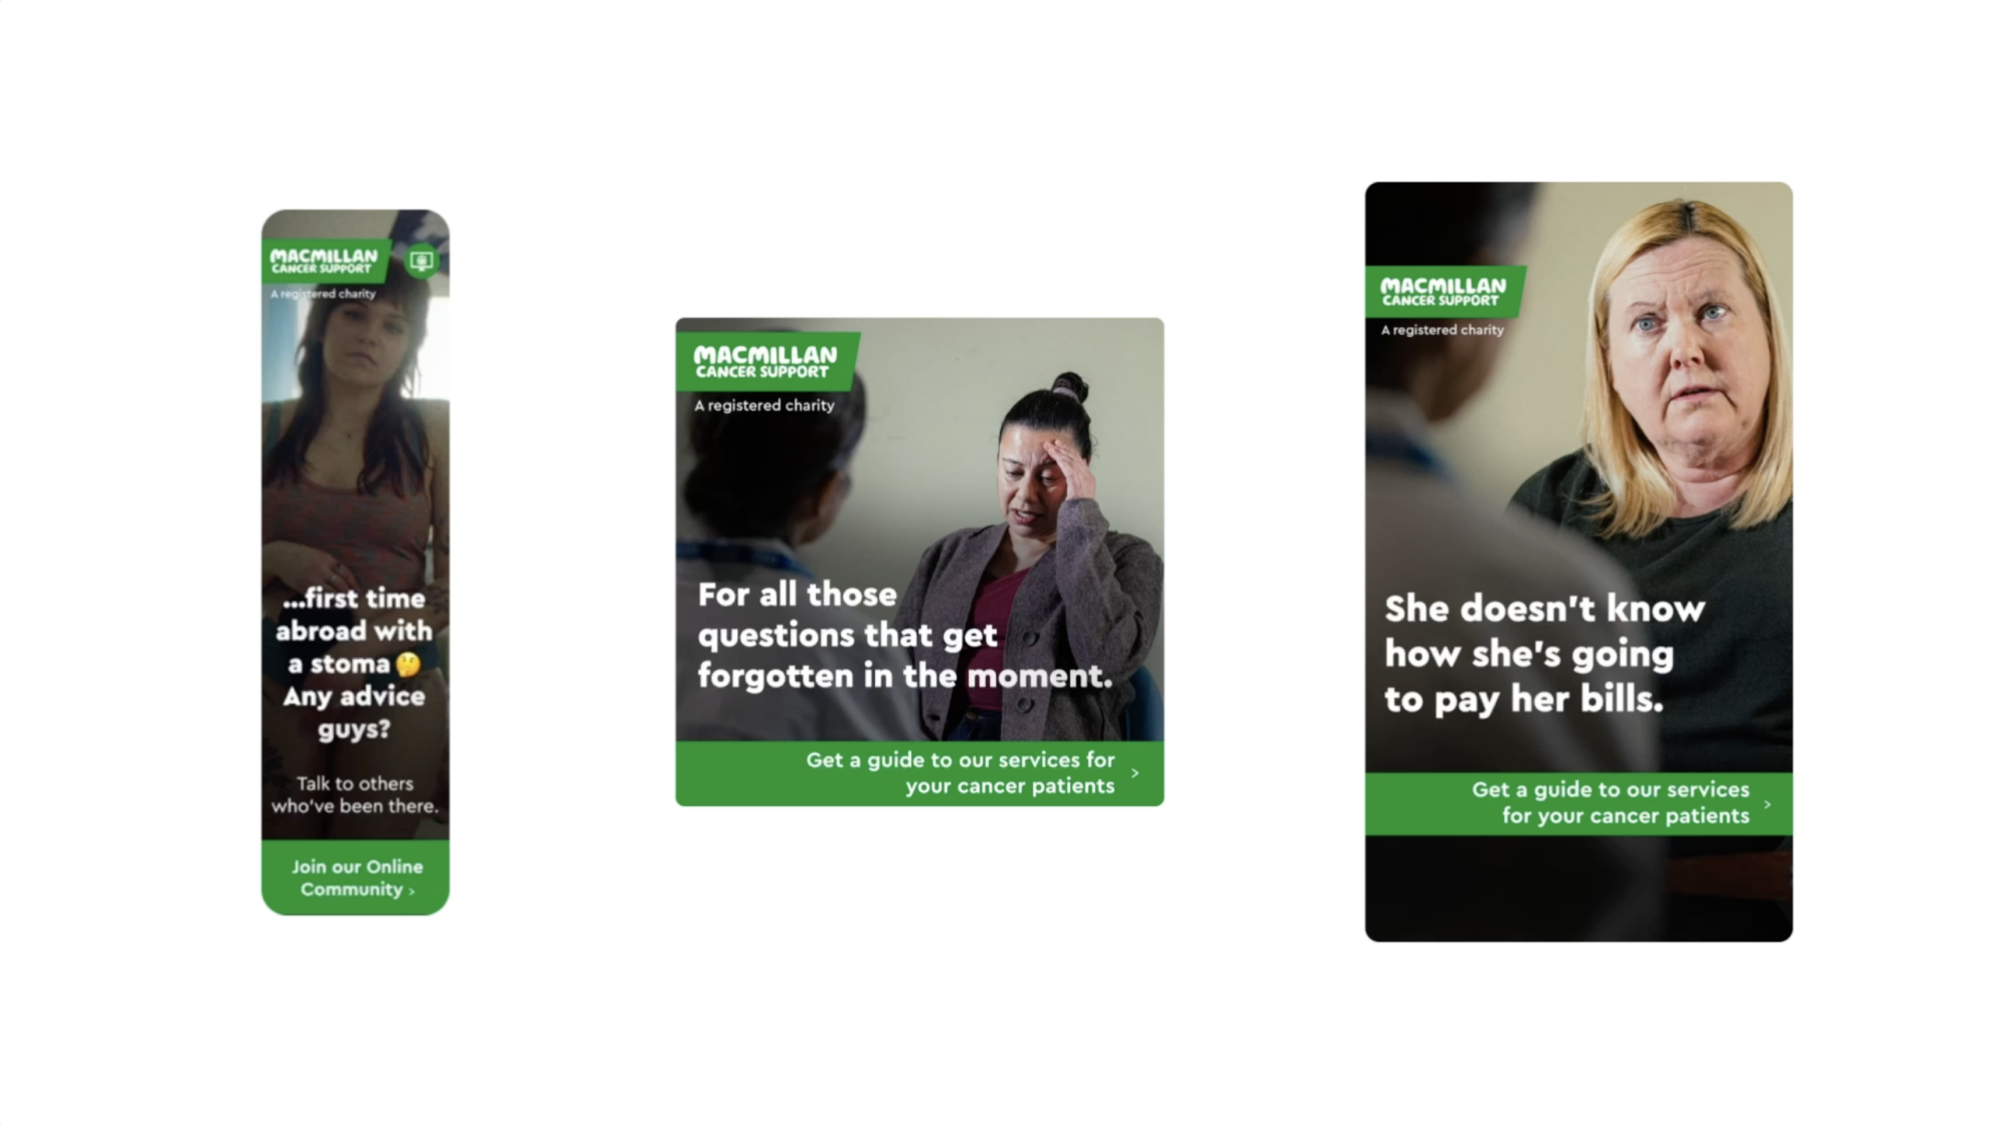 Series of digital assets from Macmillan's strategy across Google, Facebook, Stories and more.